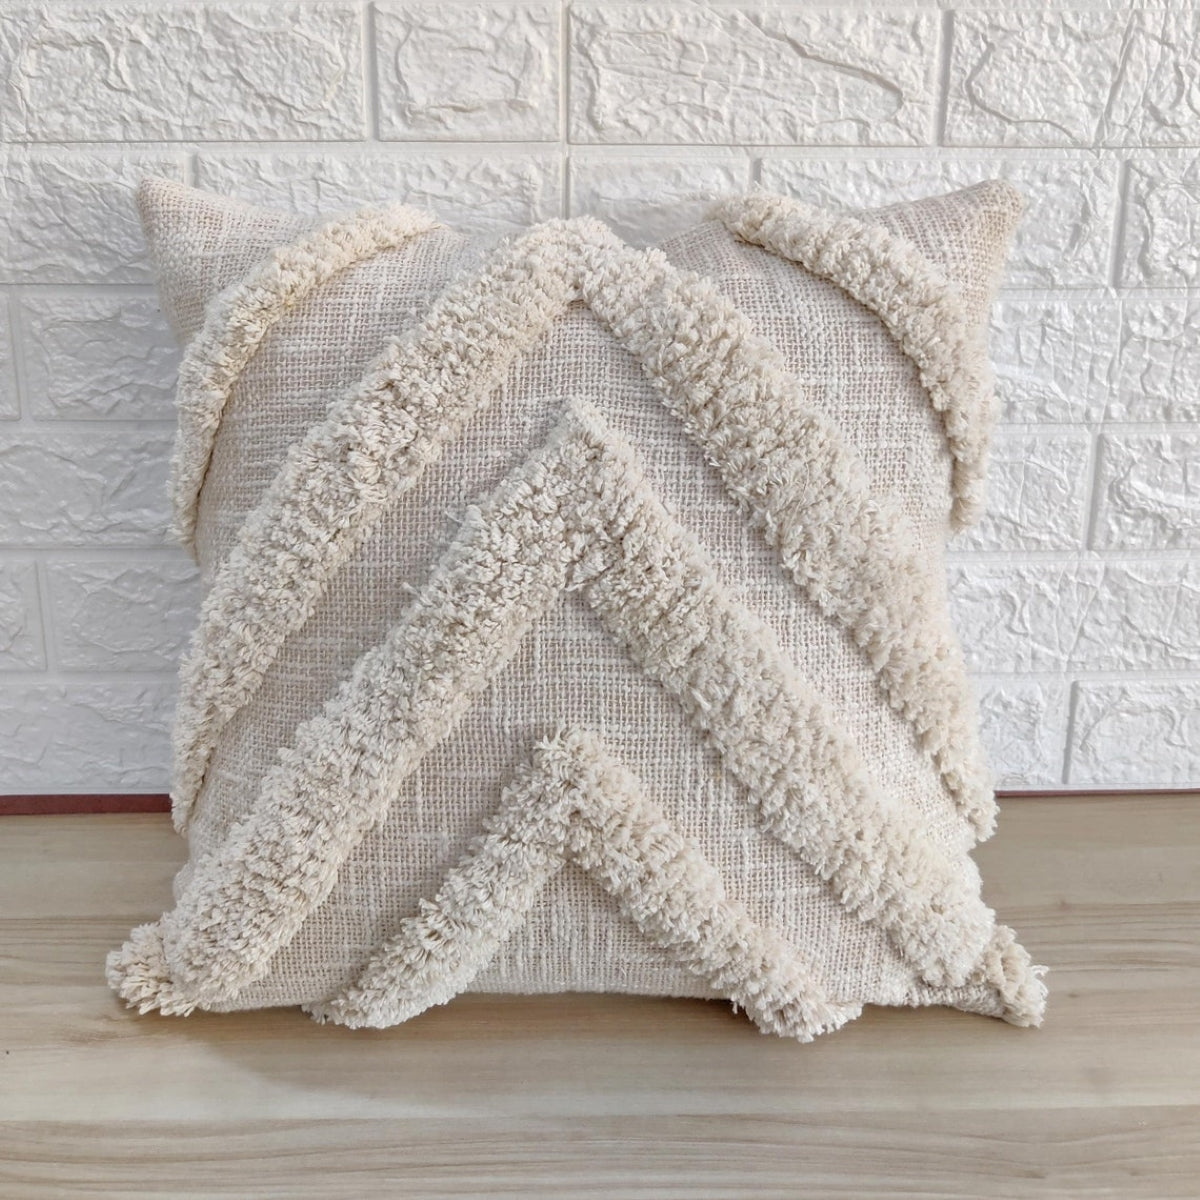 Ivory Handtufted Textured Cotton Cushion Cover